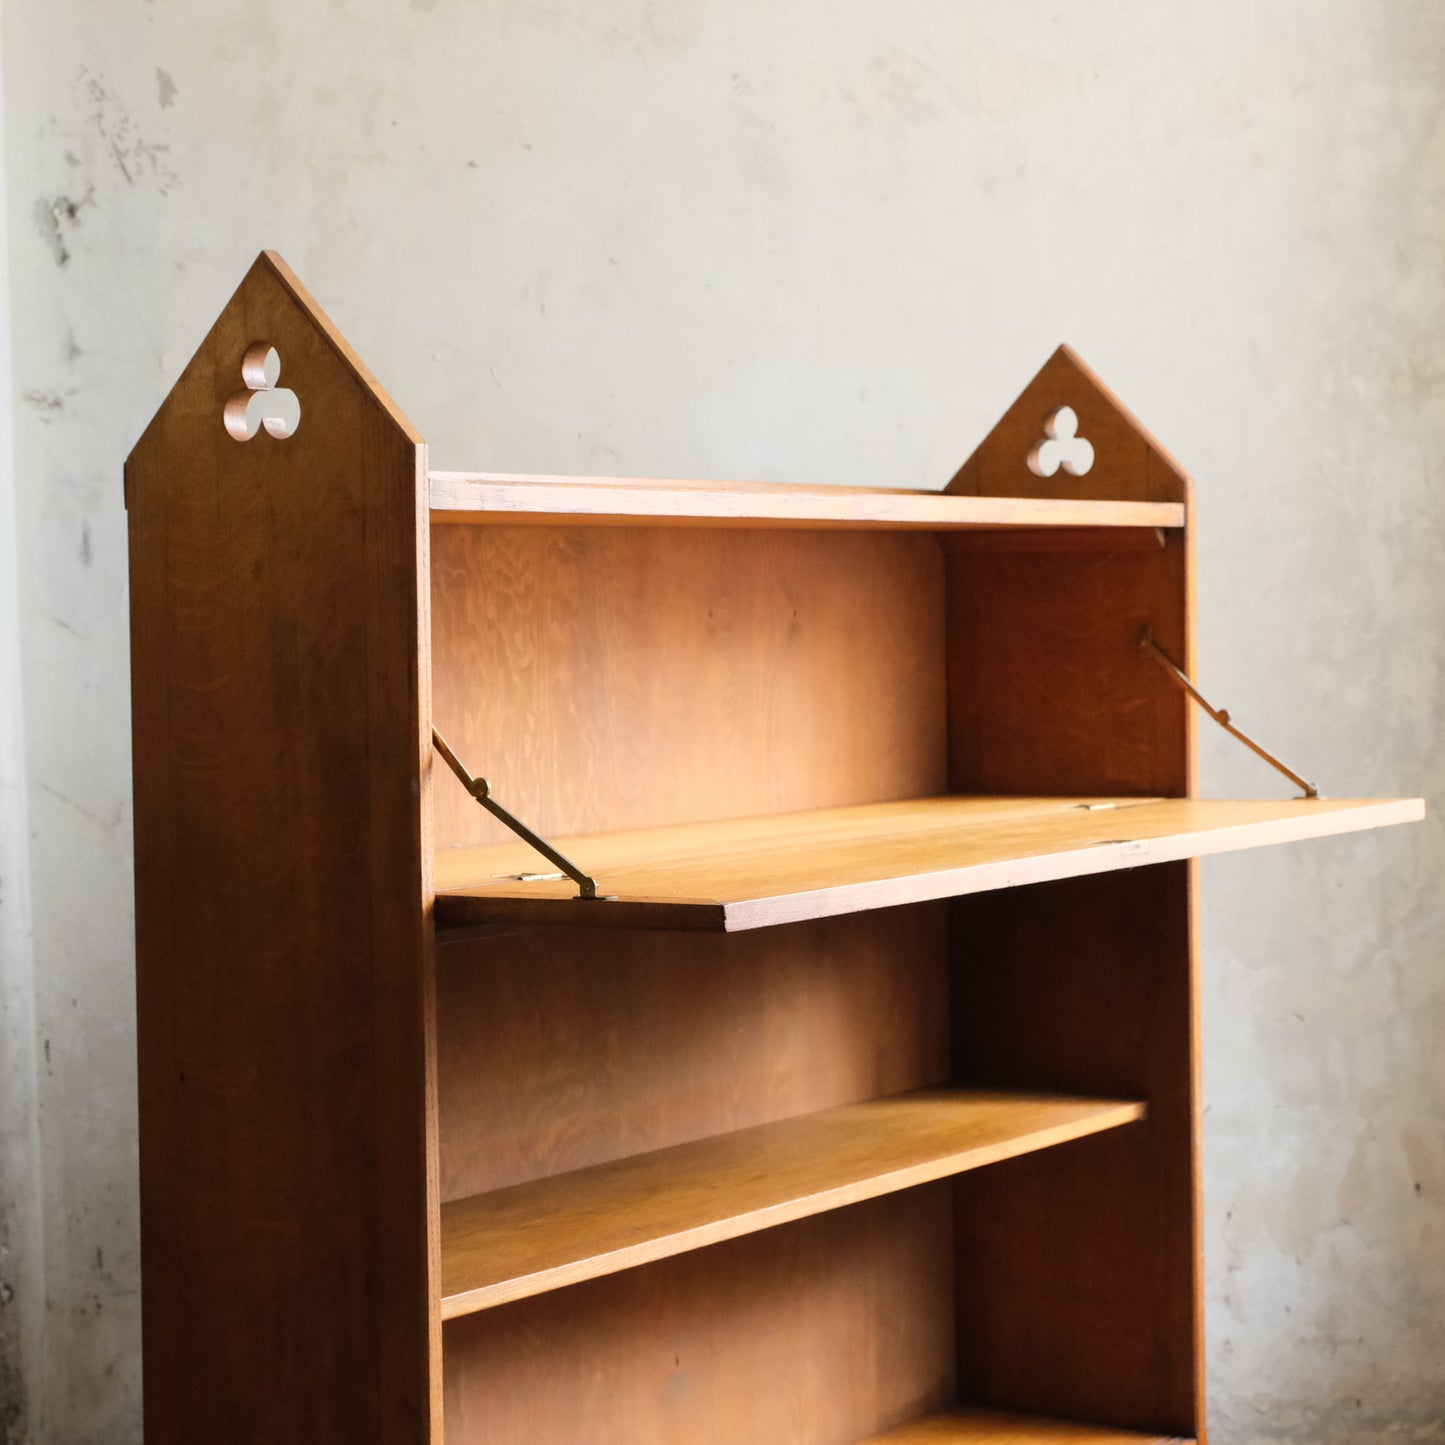 Church Bookshelves with drop down front